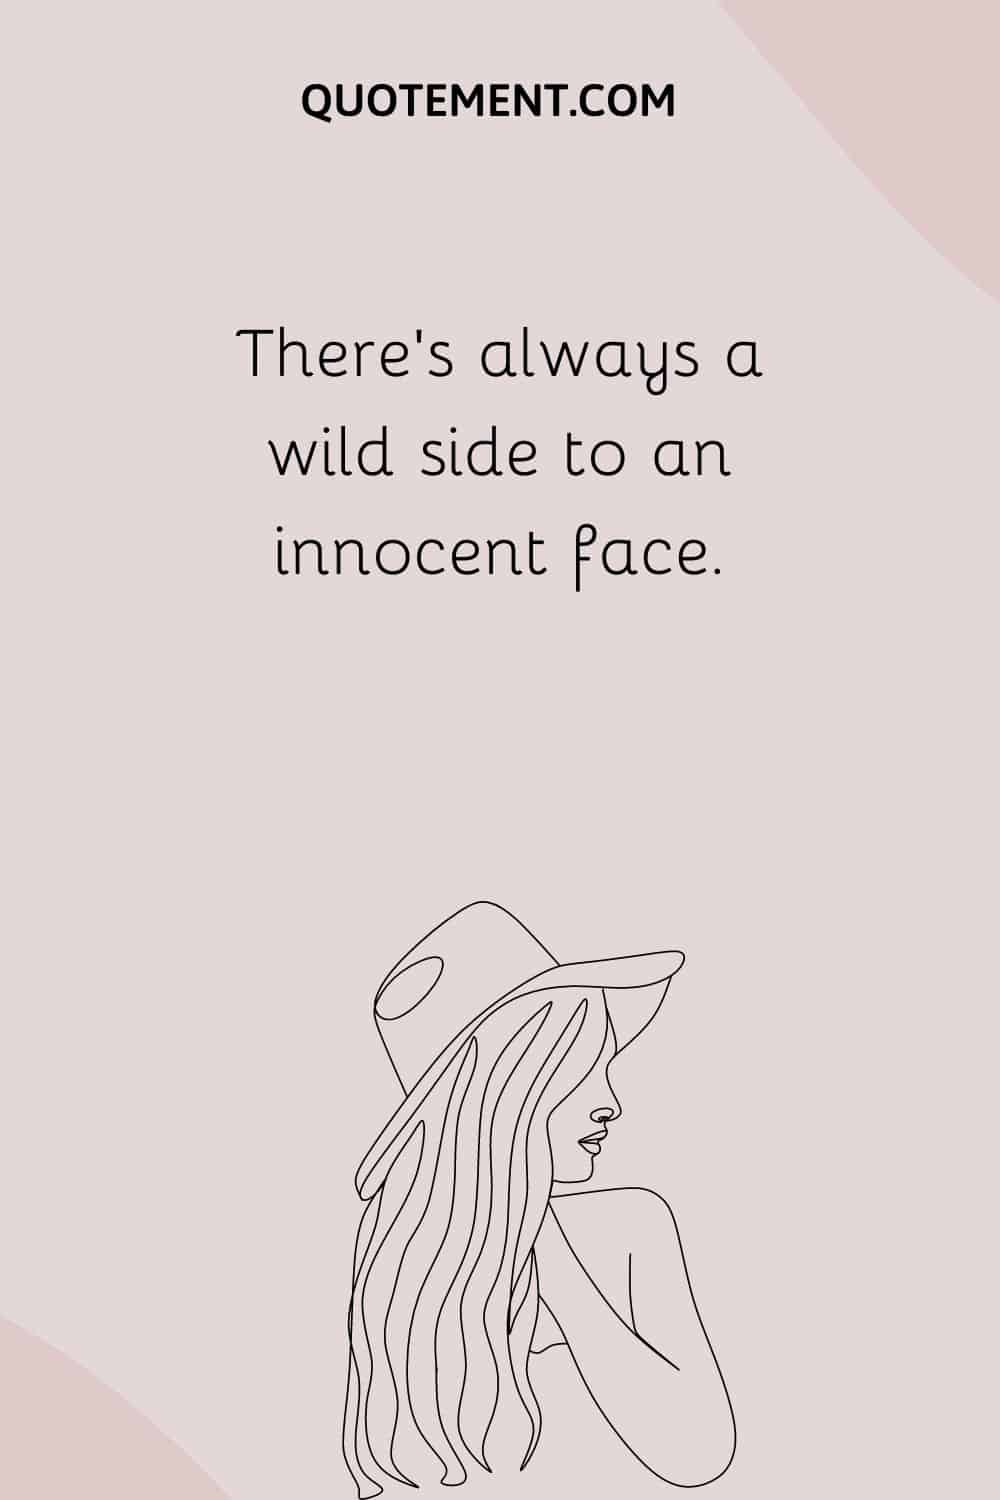 There’s always a wild side to an innocent face.